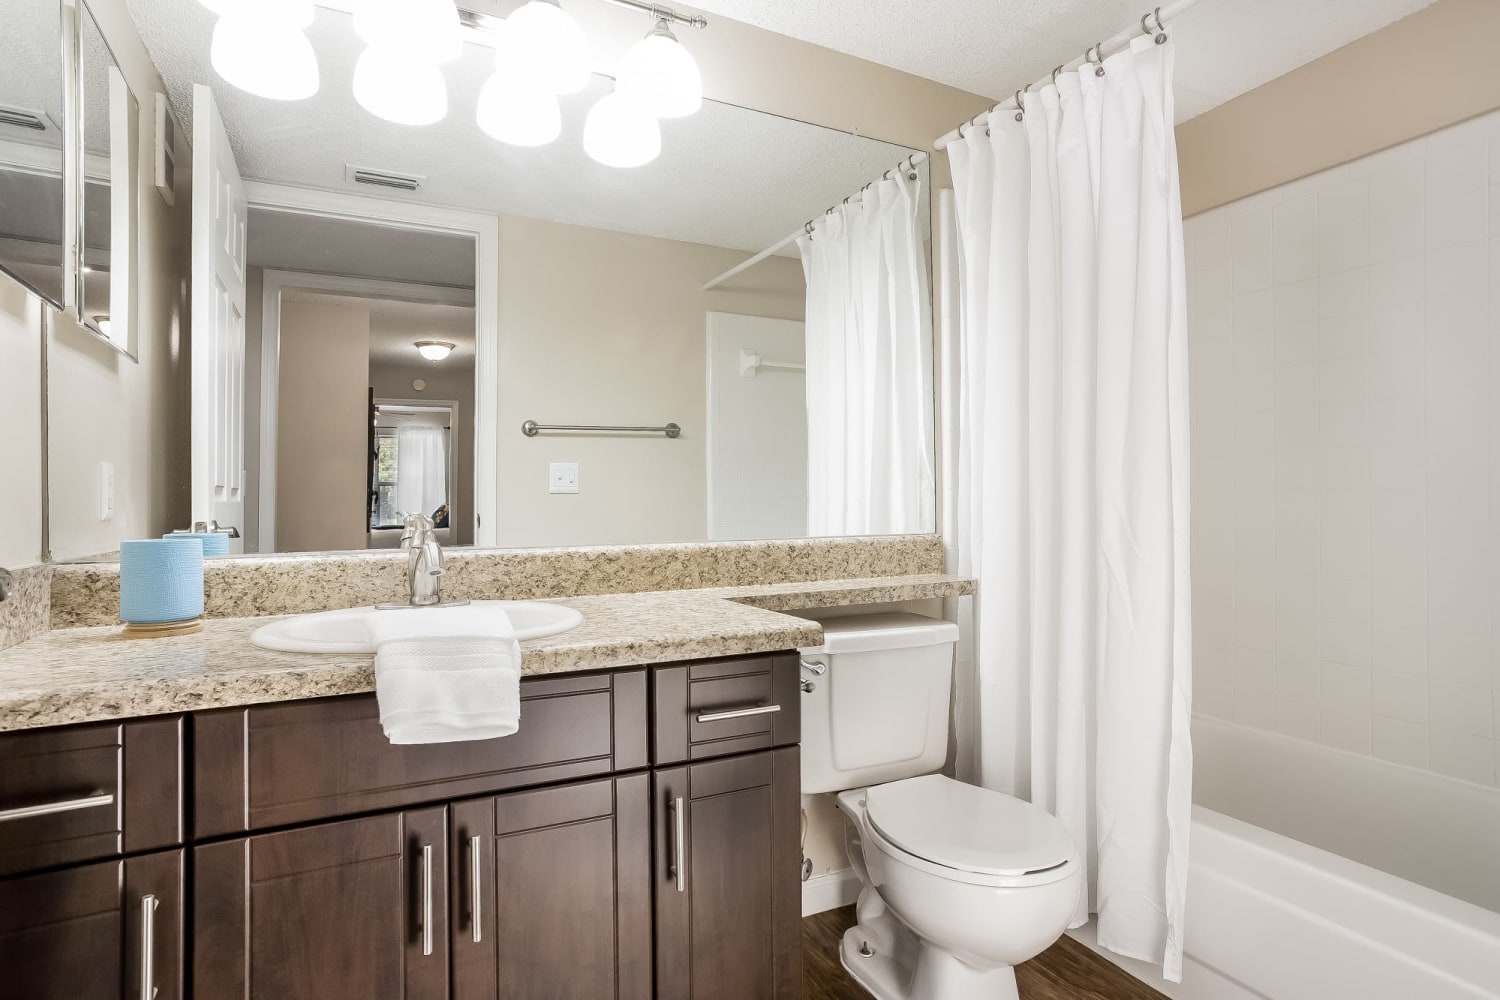 Bathroom at Tuscany Pointe at Somerset Place Apartment Homes in Boca Raton, Florida